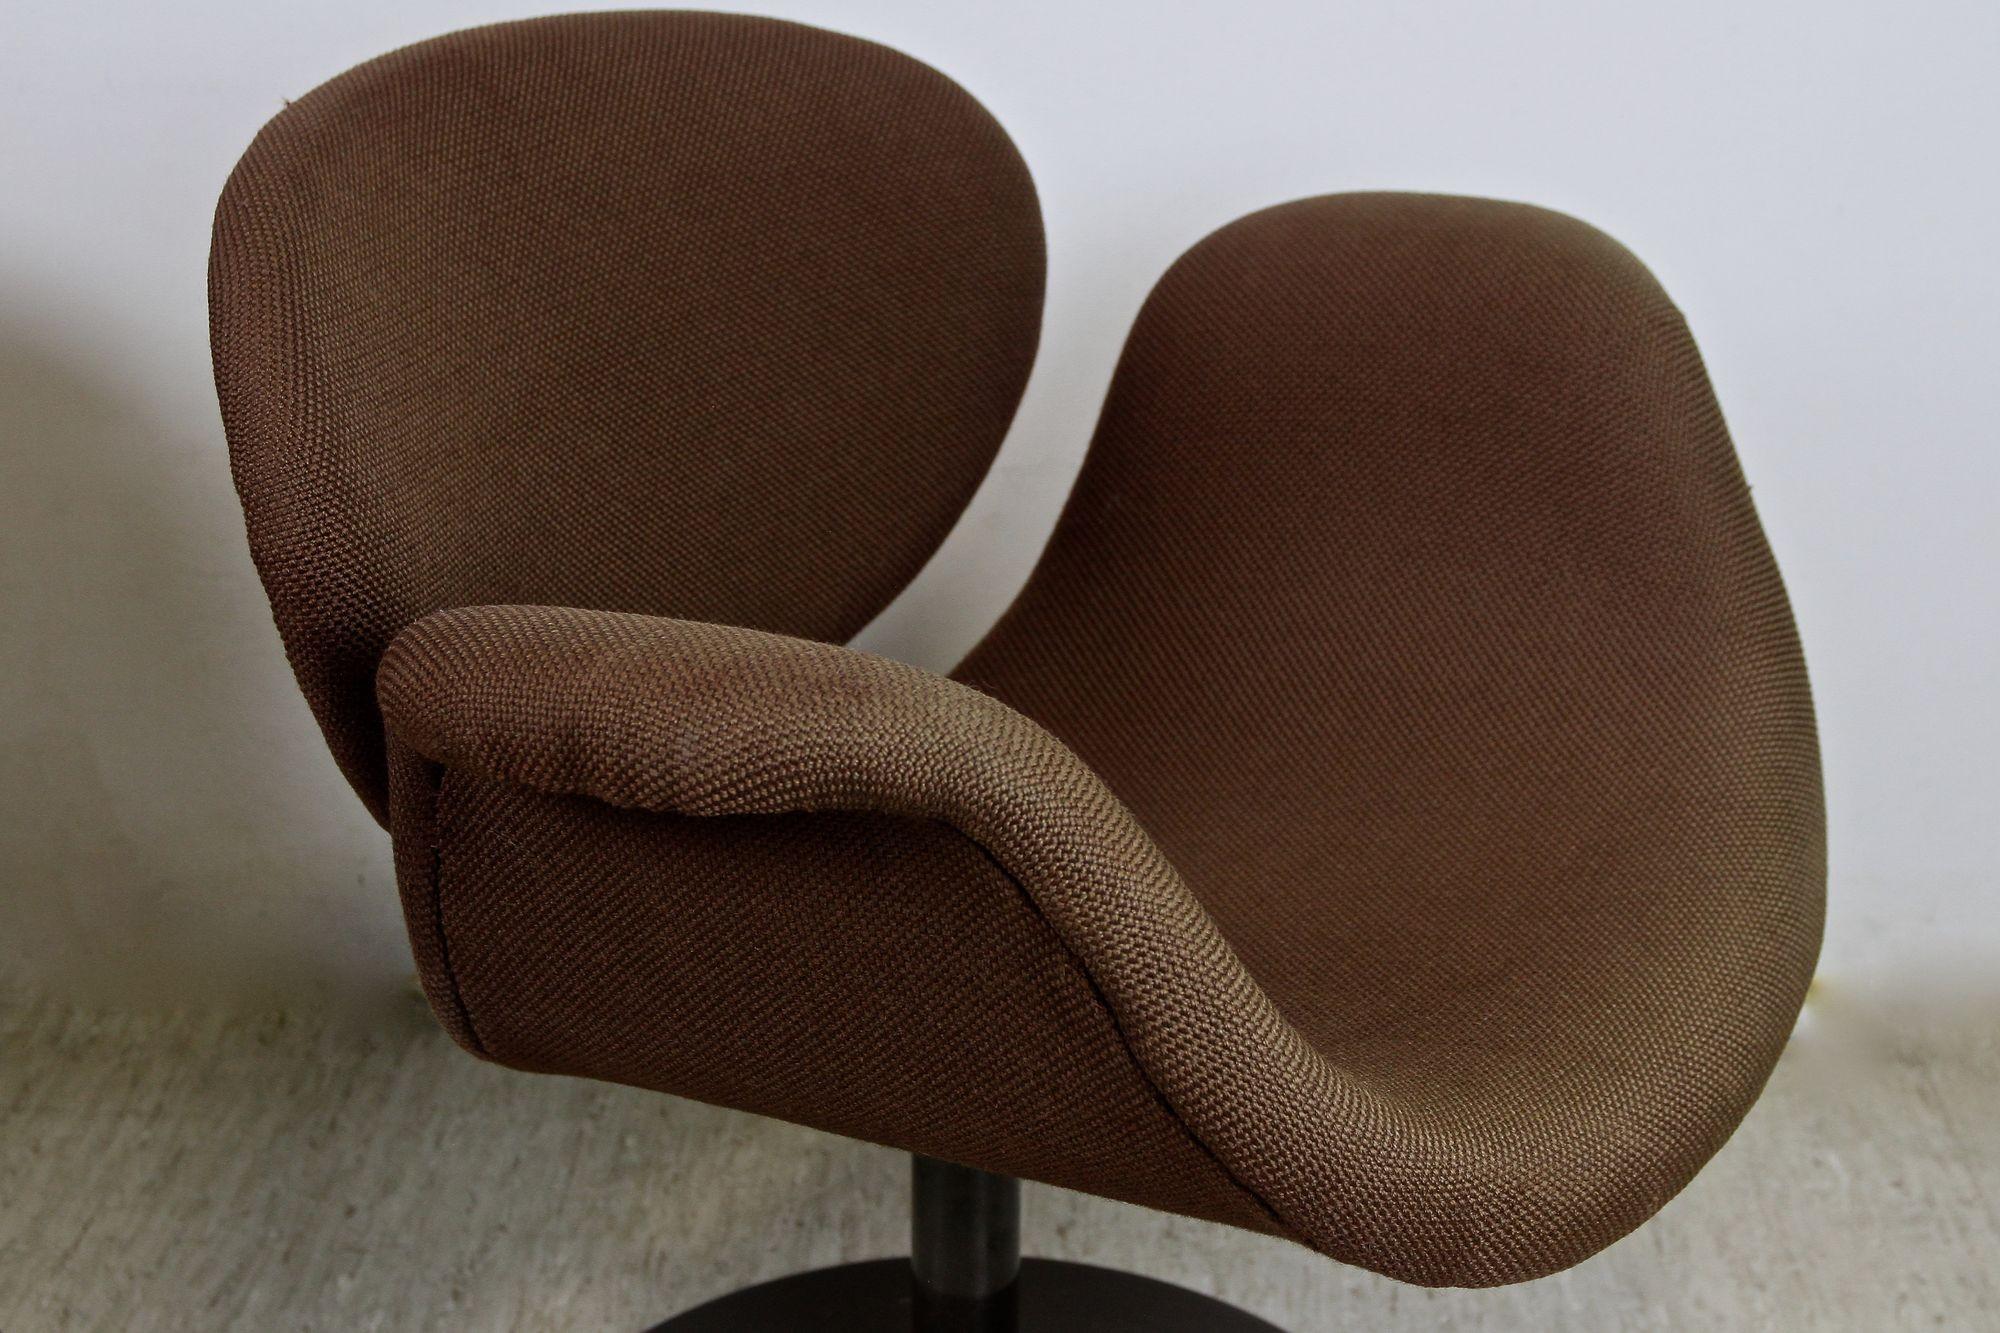 Pair of Mid-Century Swivel Tulip Armchairs by Pierre Paulin, NL circa 1965 For Sale 2